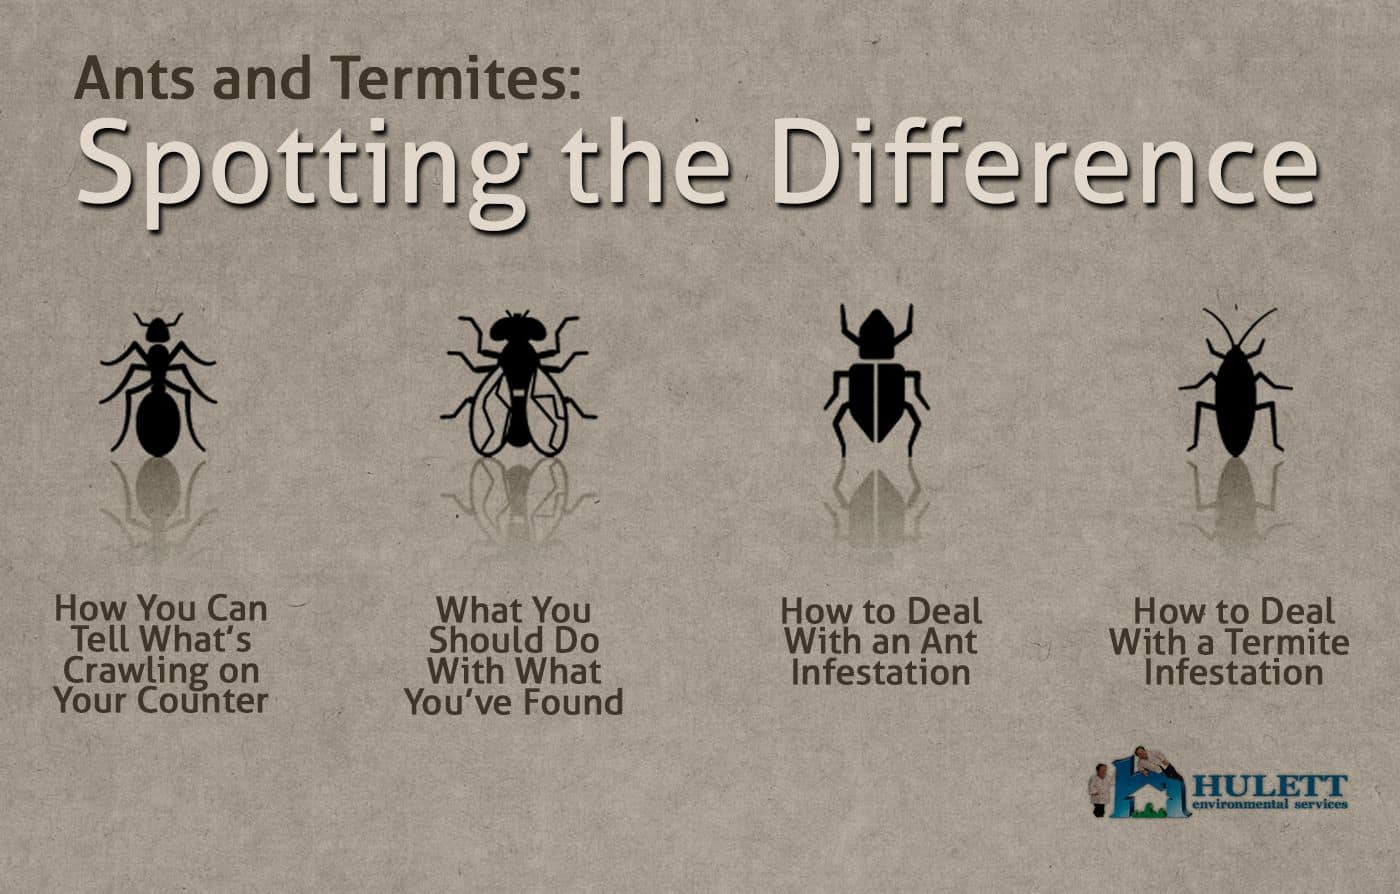 A graphic detailing the differences between ants and termites by anatomy.